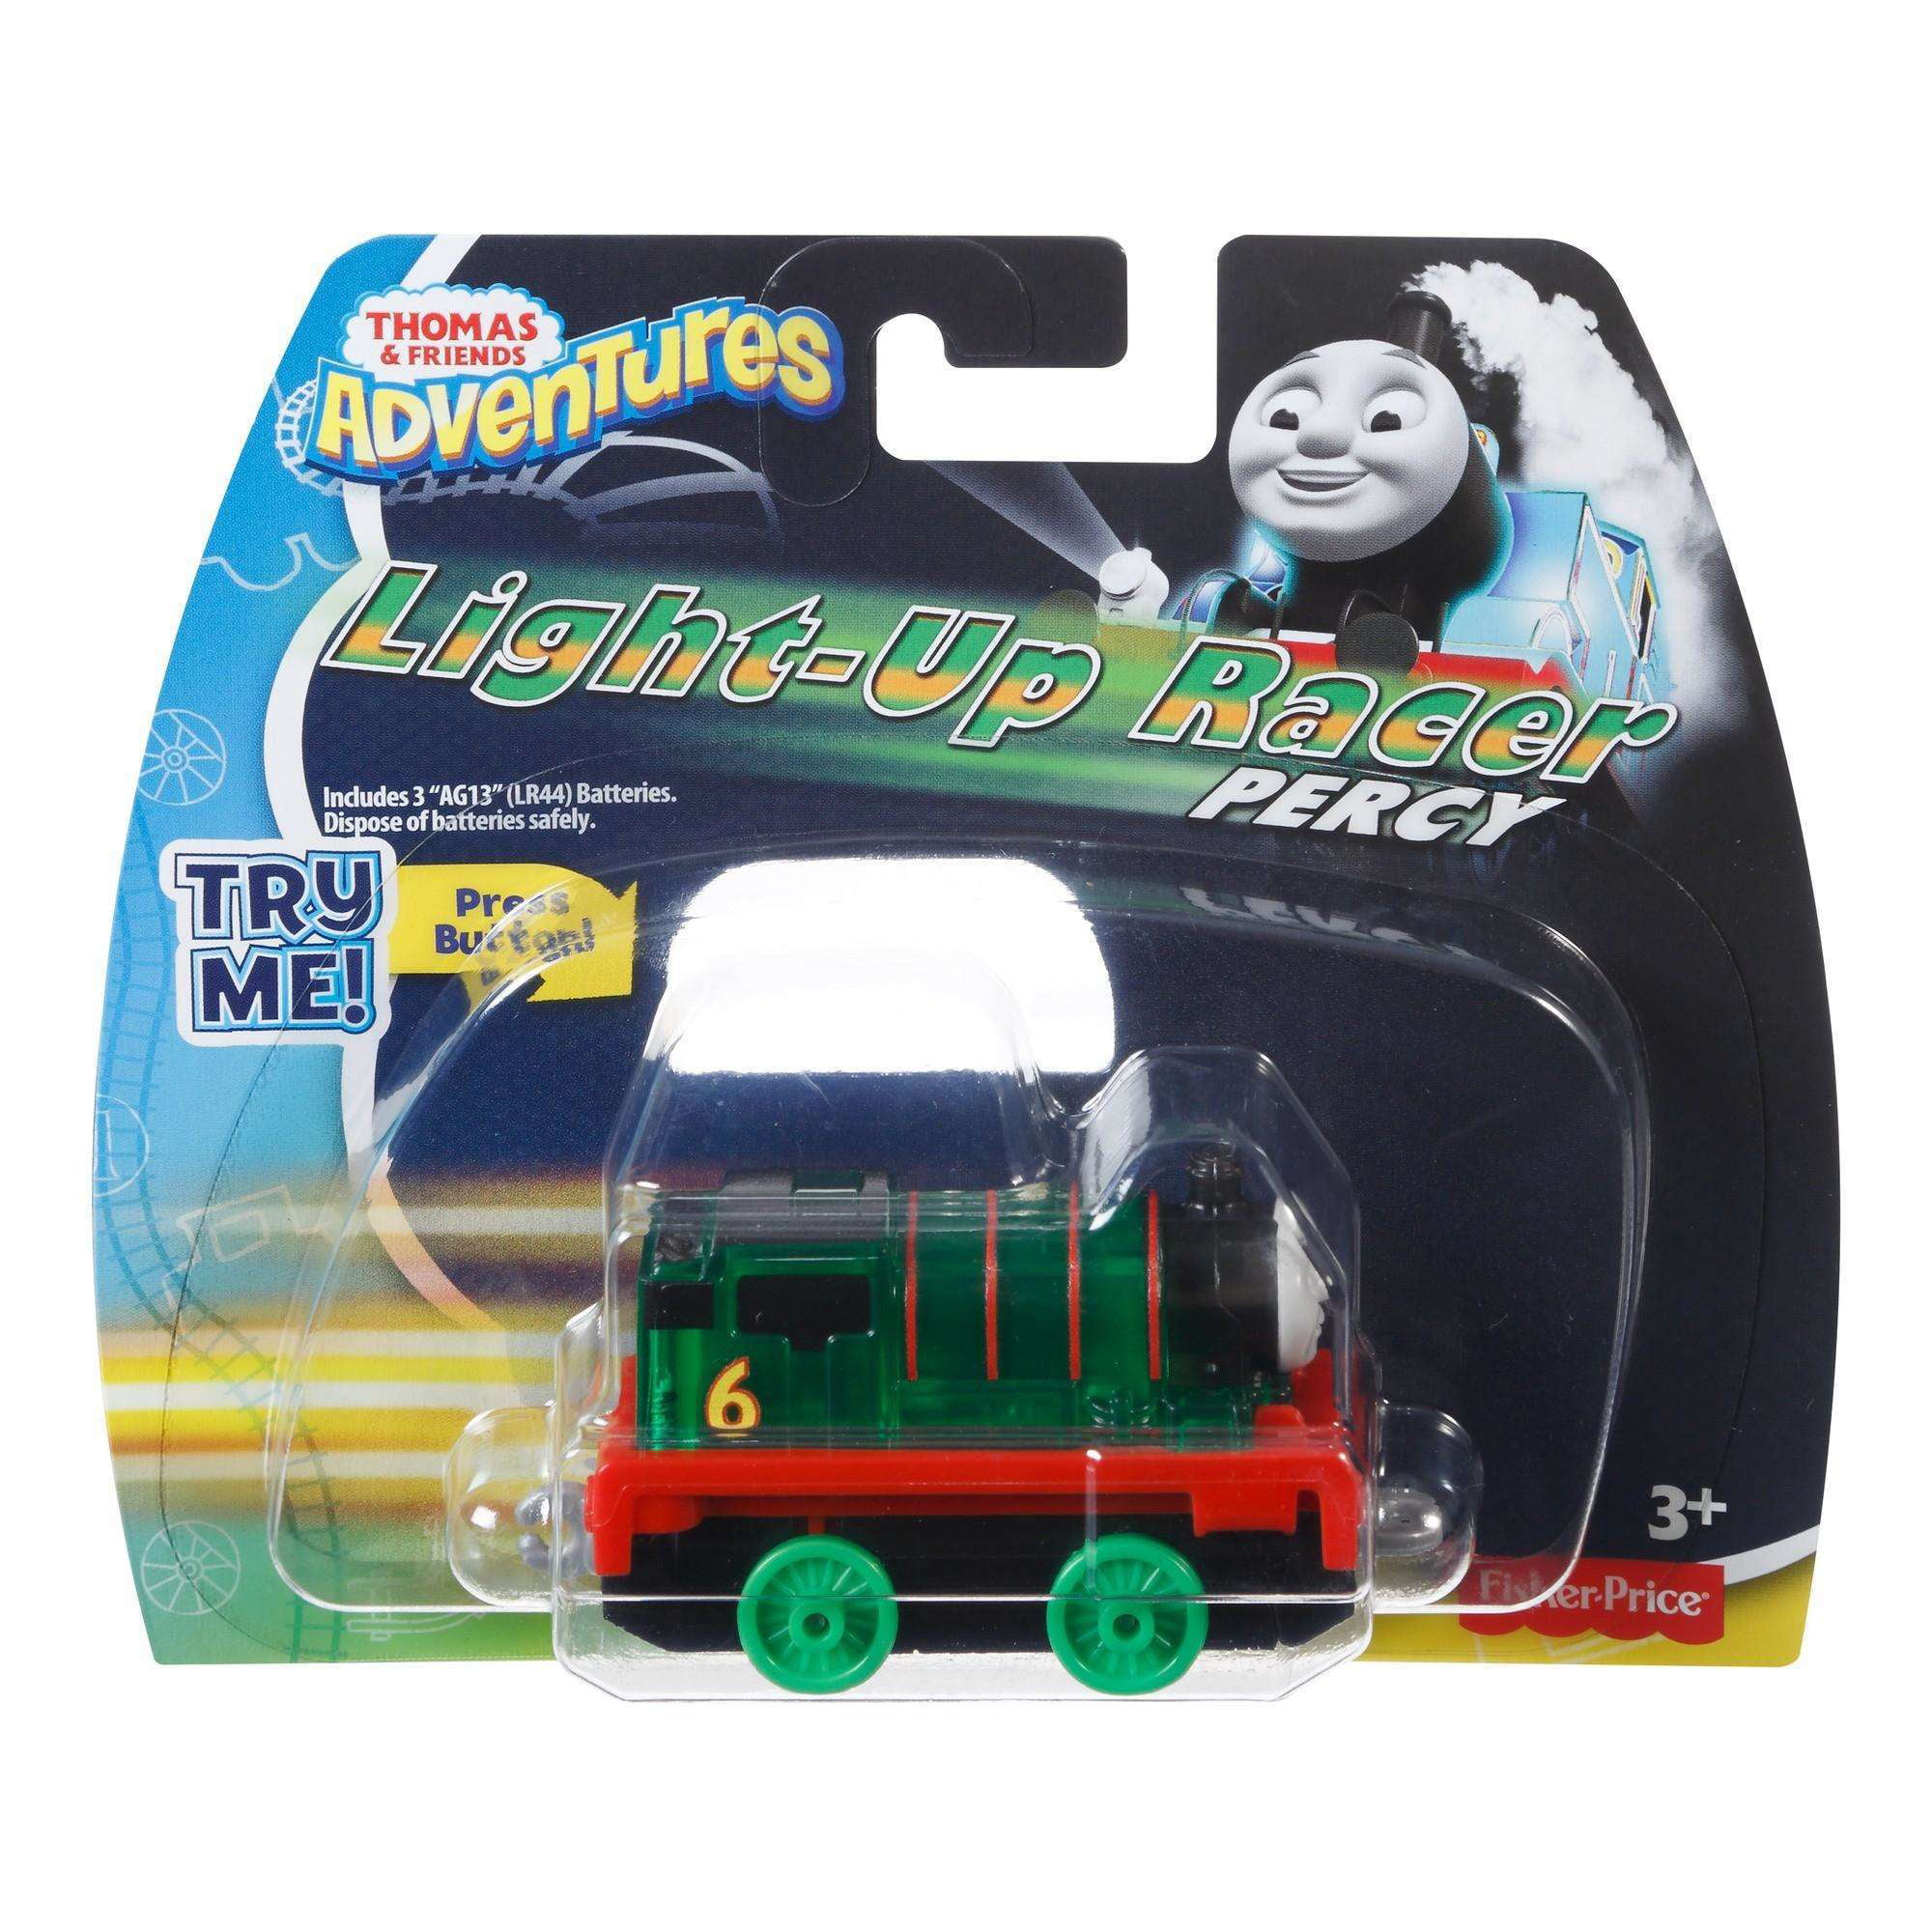 Thomas & Friends Adventures Light-up Racer Percy 